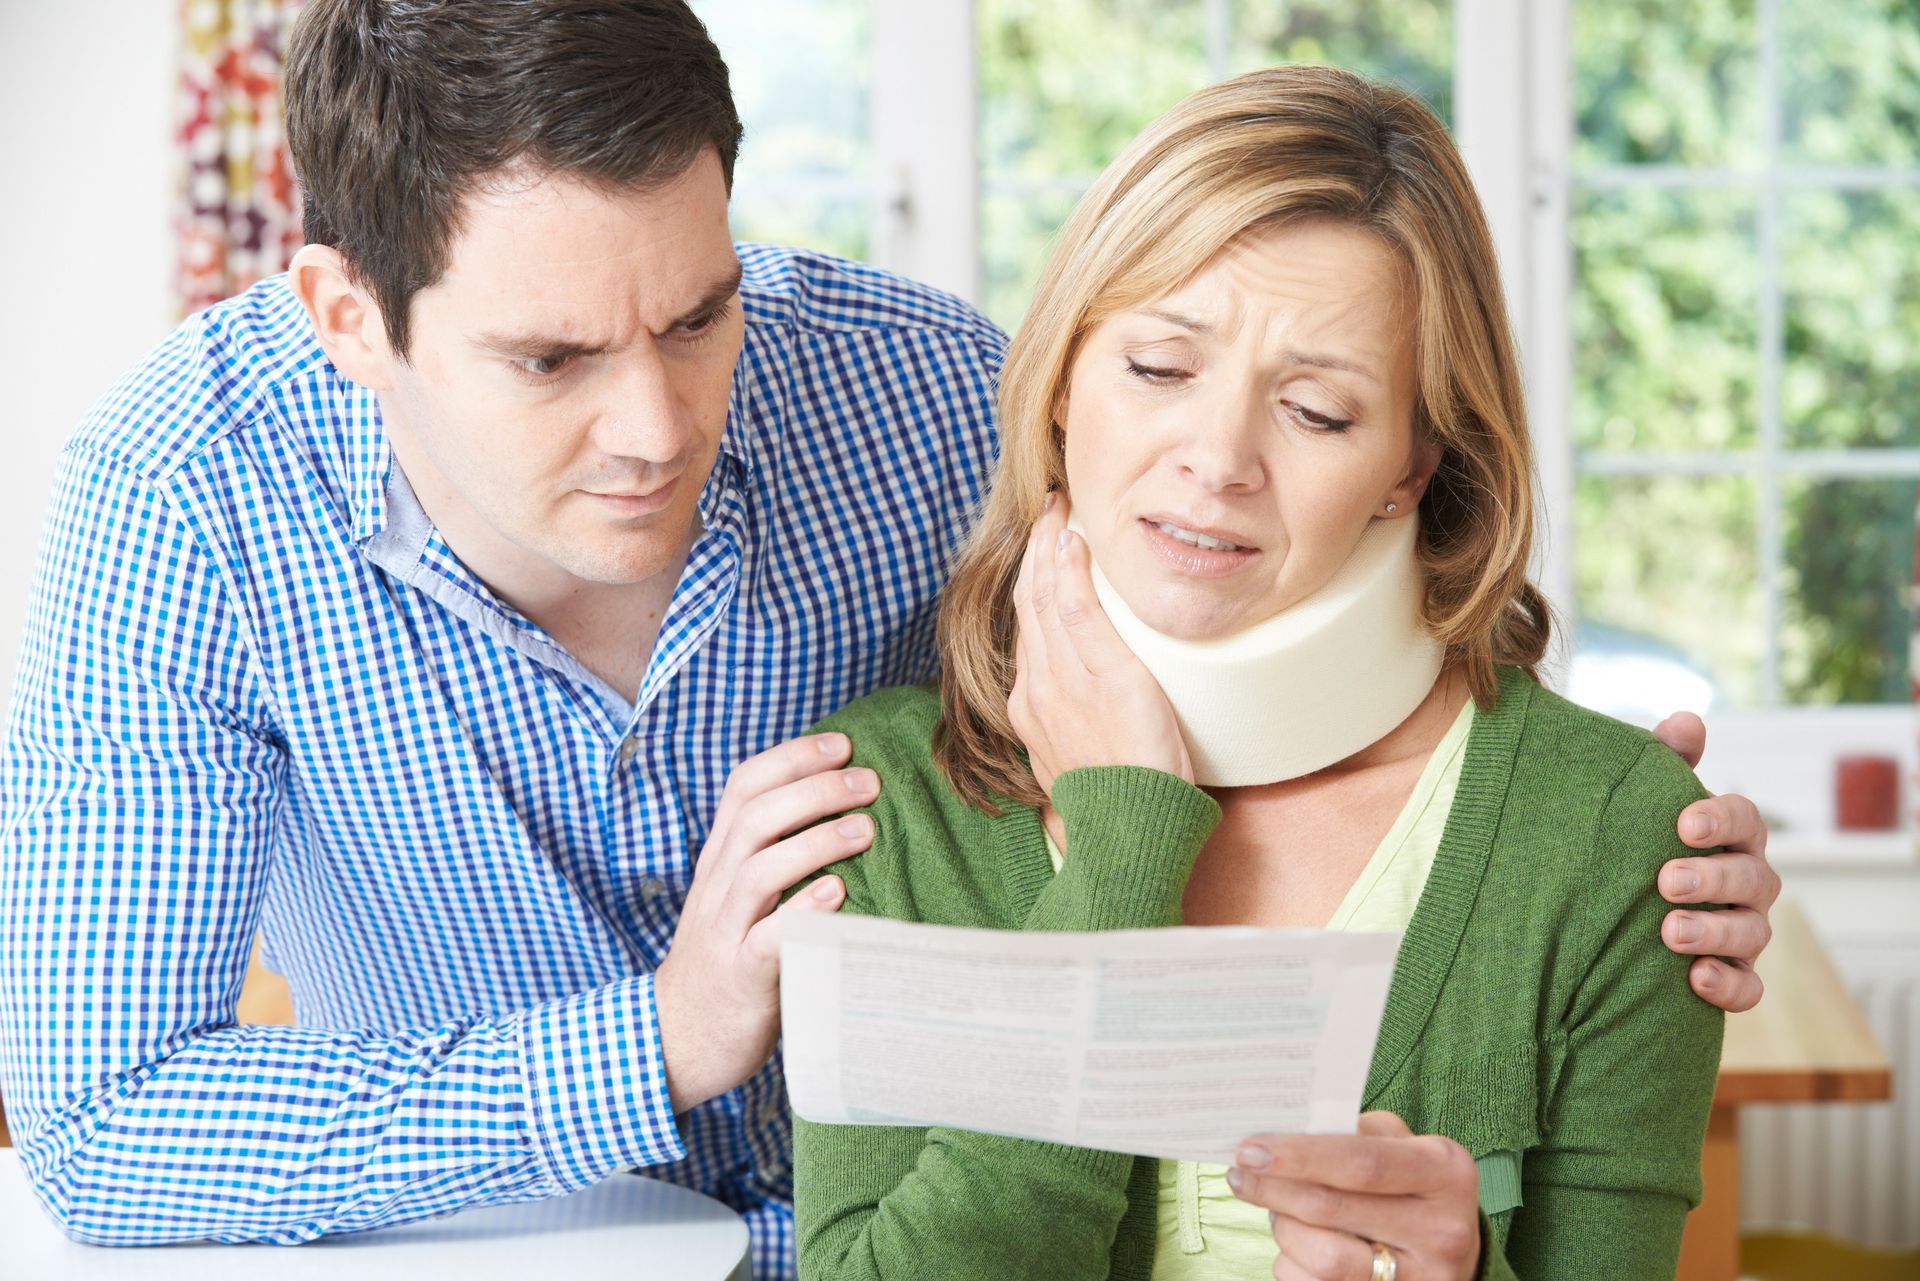 personal injury law firms